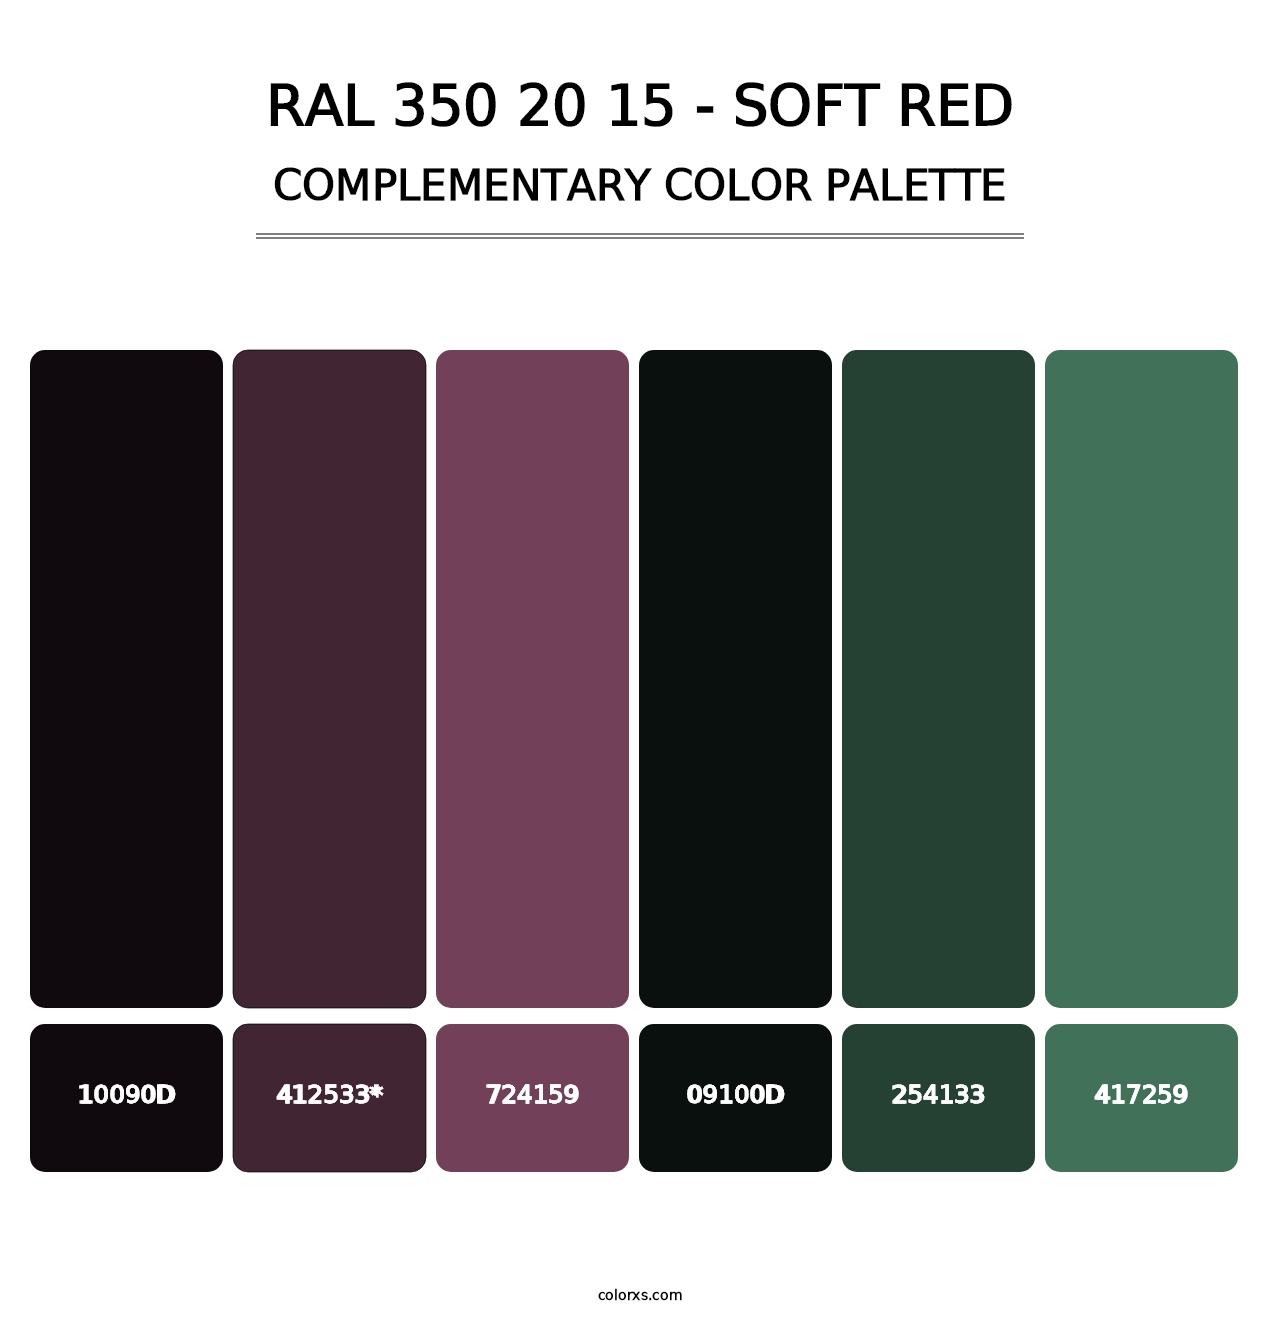 RAL 350 20 15 - Soft Red - Complementary Color Palette